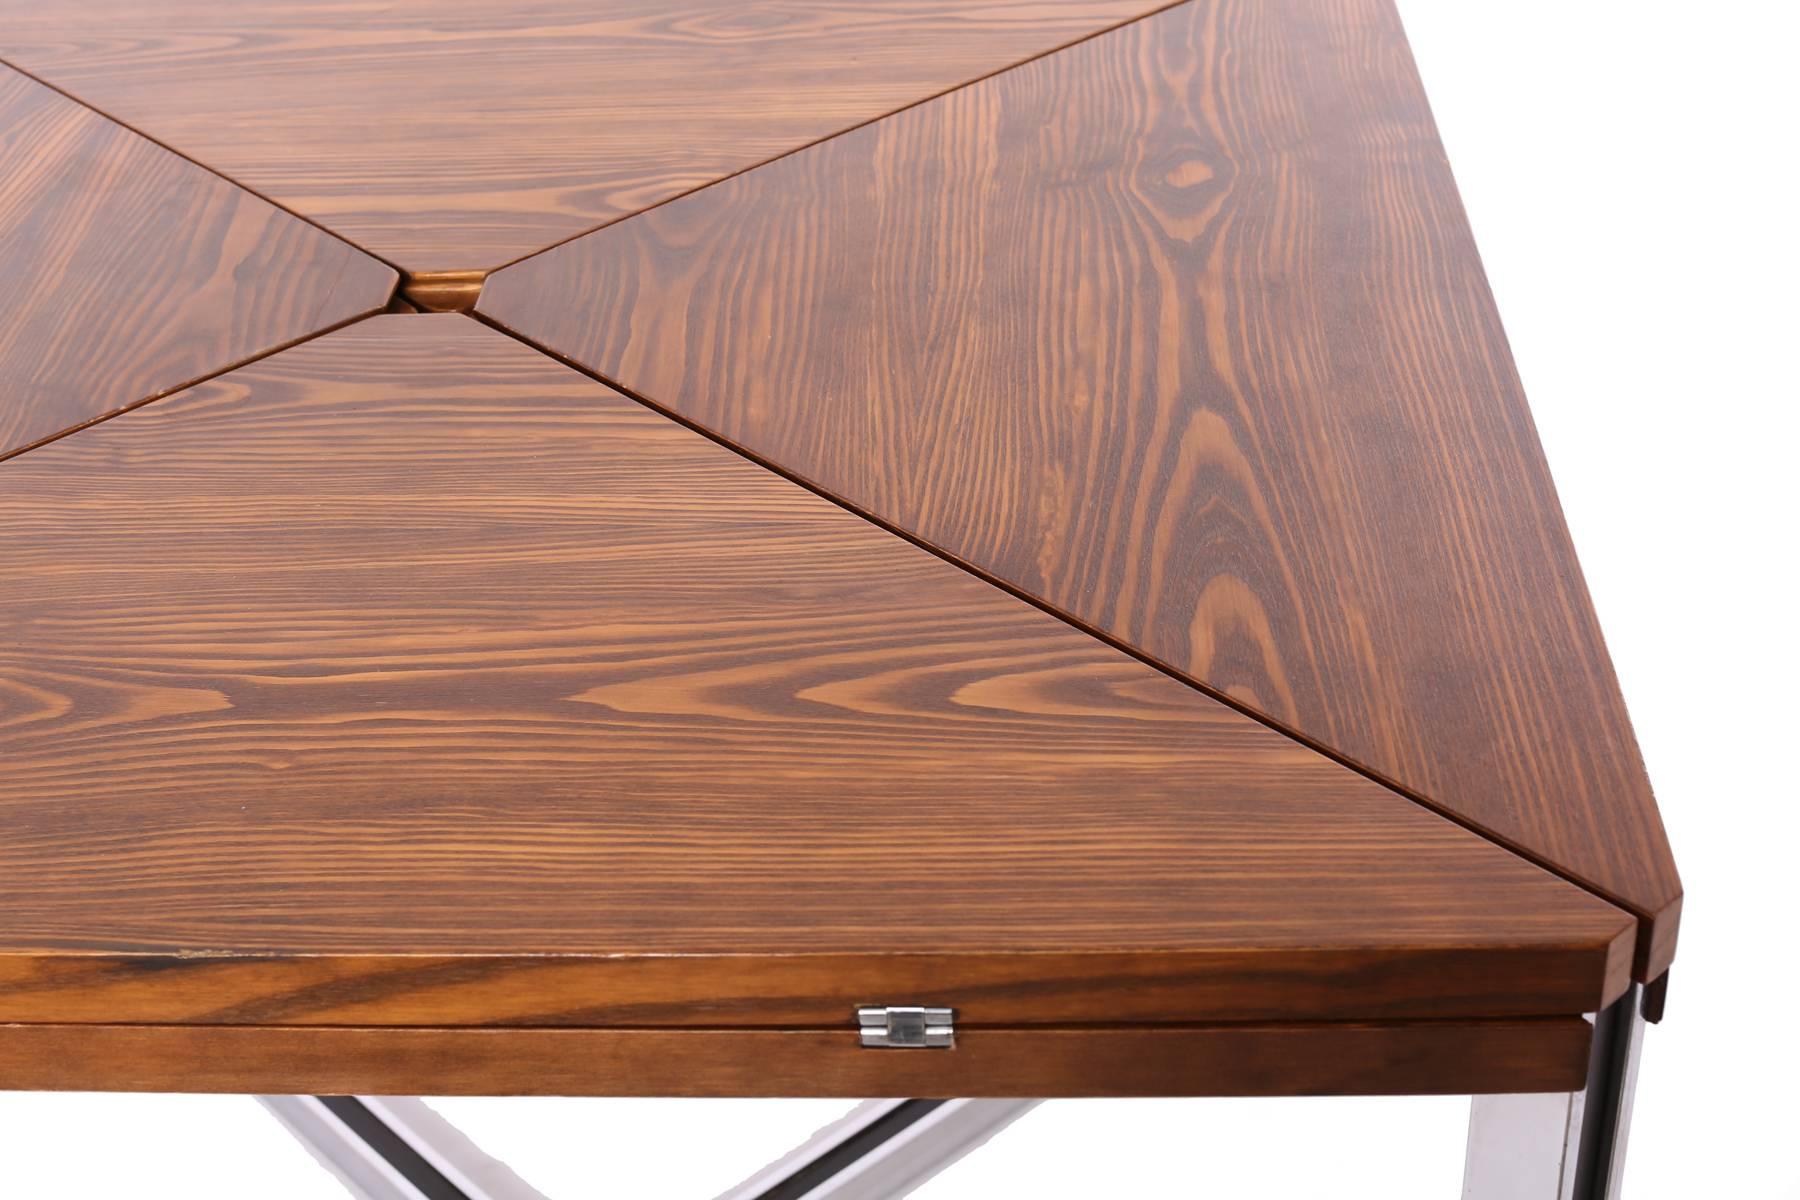 Expandable wenge and chrome dining table by Dyrlund, circa early 1970s. This seldom seen example has a book matched beautifully grained wenge top. Each side of the dining table folds over almost origami style to reveal inset steel and can be used in